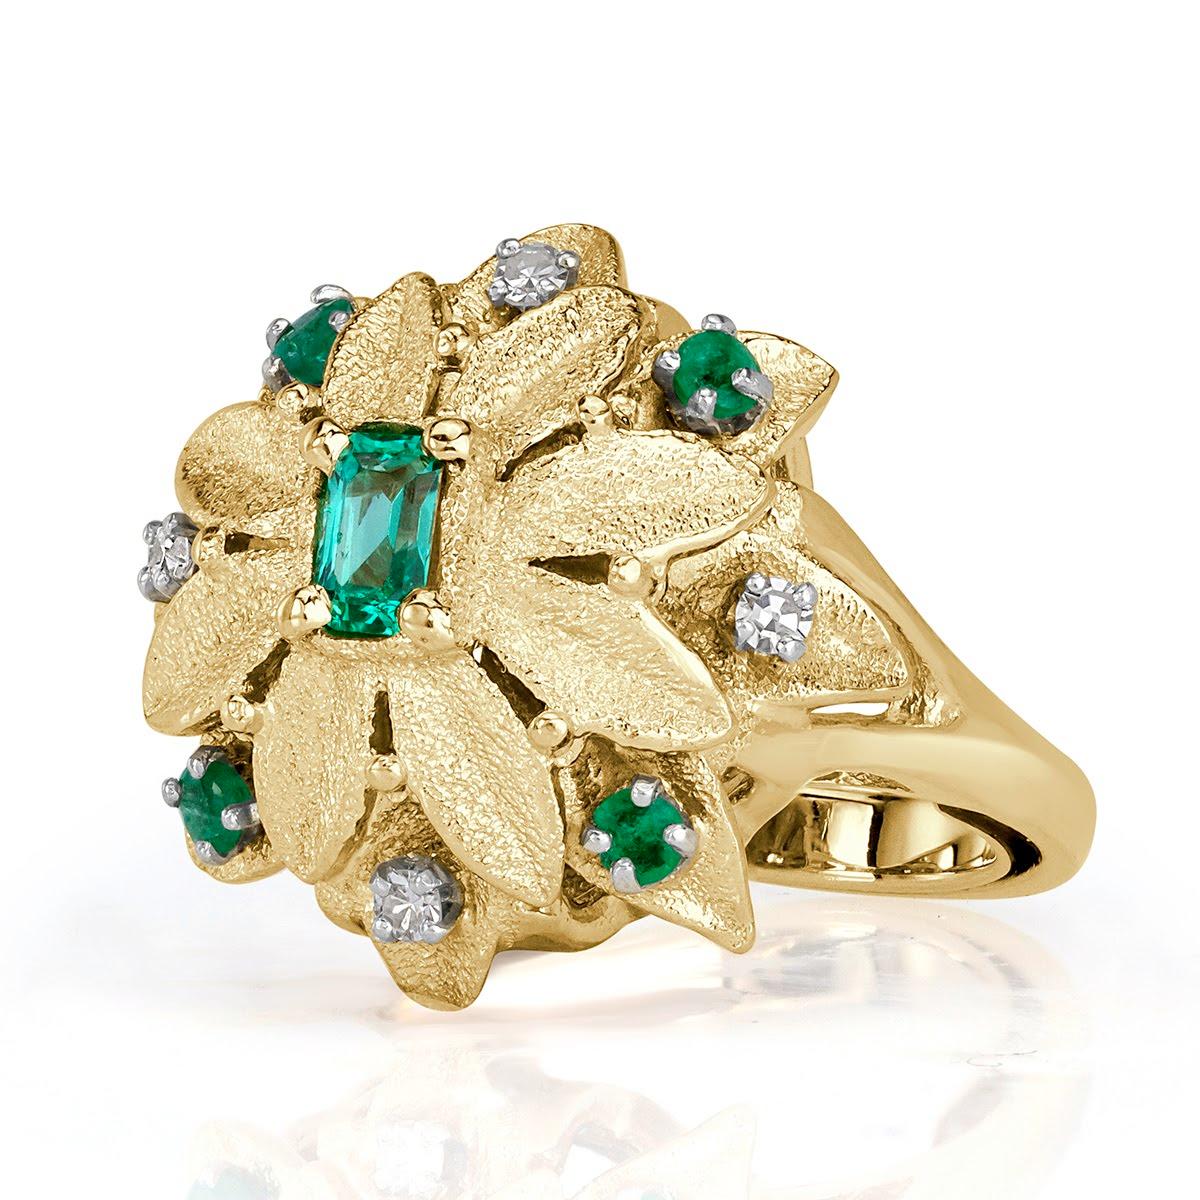 This gorgeous vintage diamond and emerald diamond ring showcases a ravishing floral design studded with 0.48ct of diamonds and green emeralds.( 0.40ct Emeralds + 0.08ct Diamonds )
